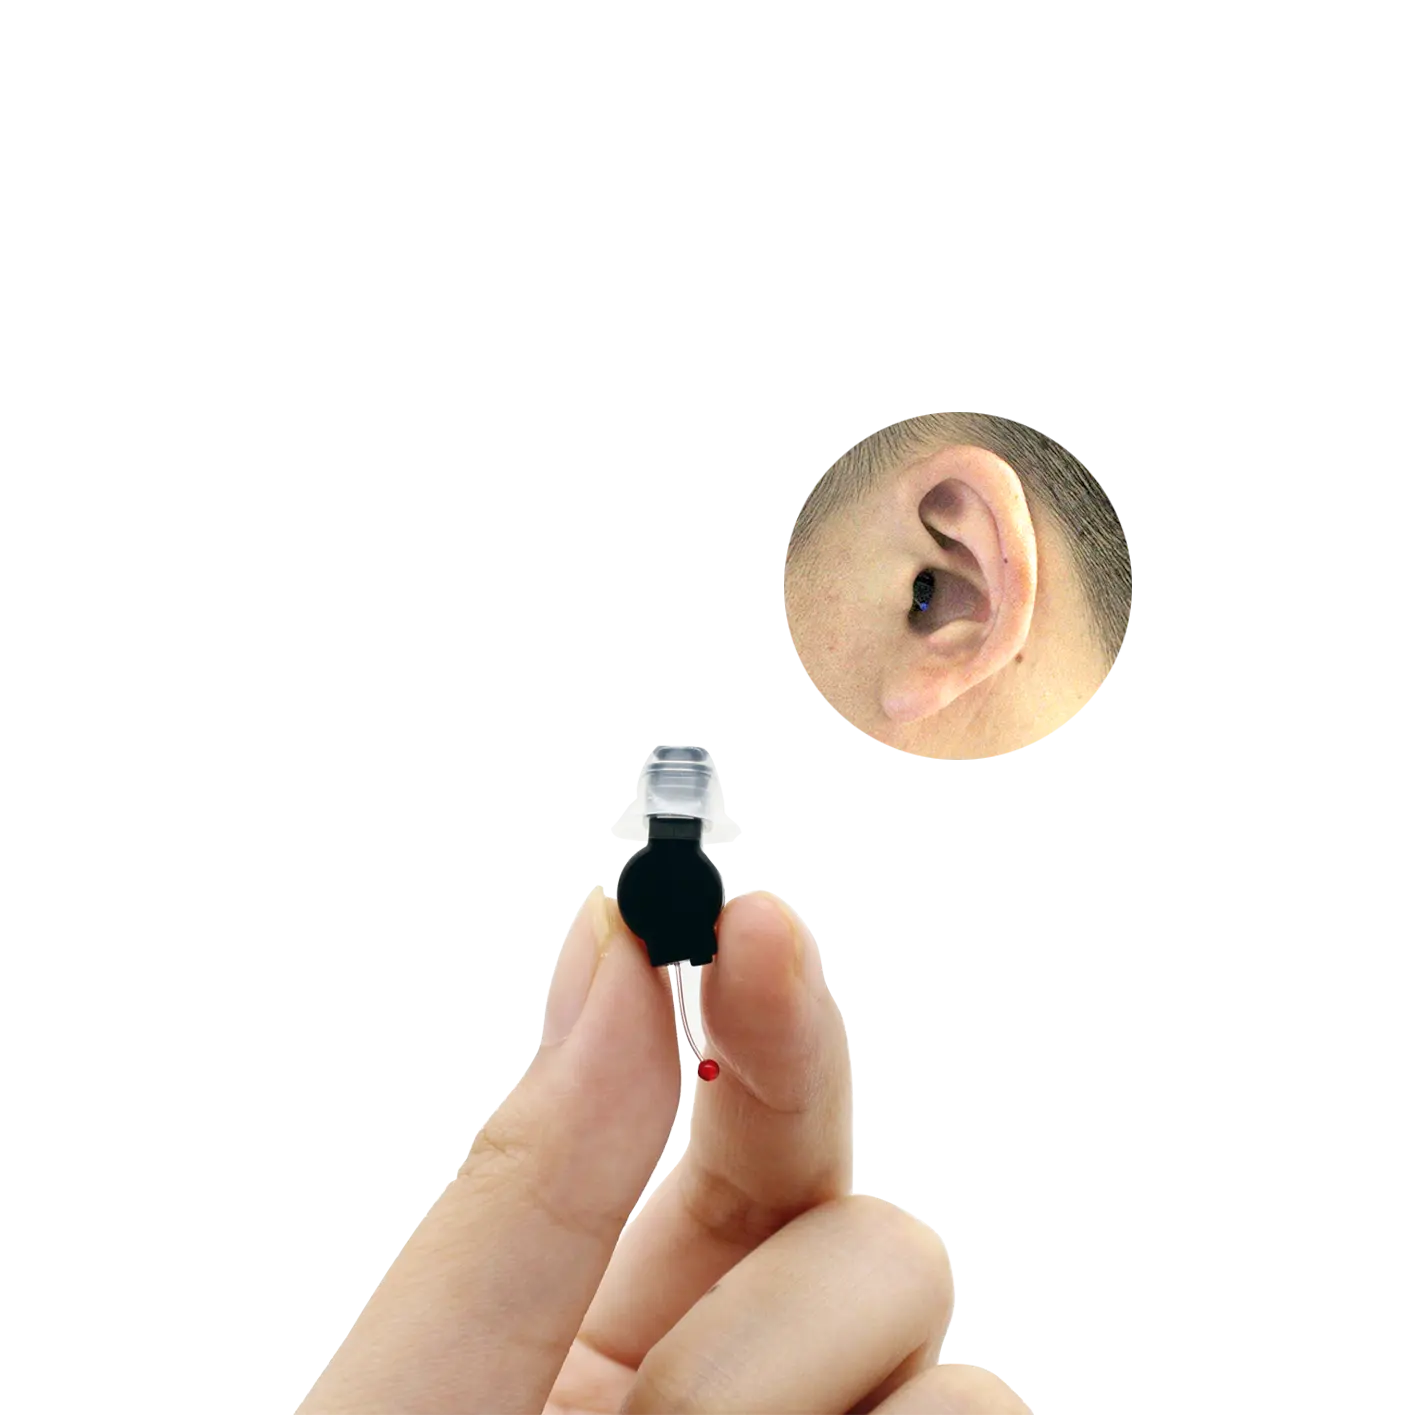 China digital hearing aids with Super Invisible Size Hot Selling Hearing Aids on Online